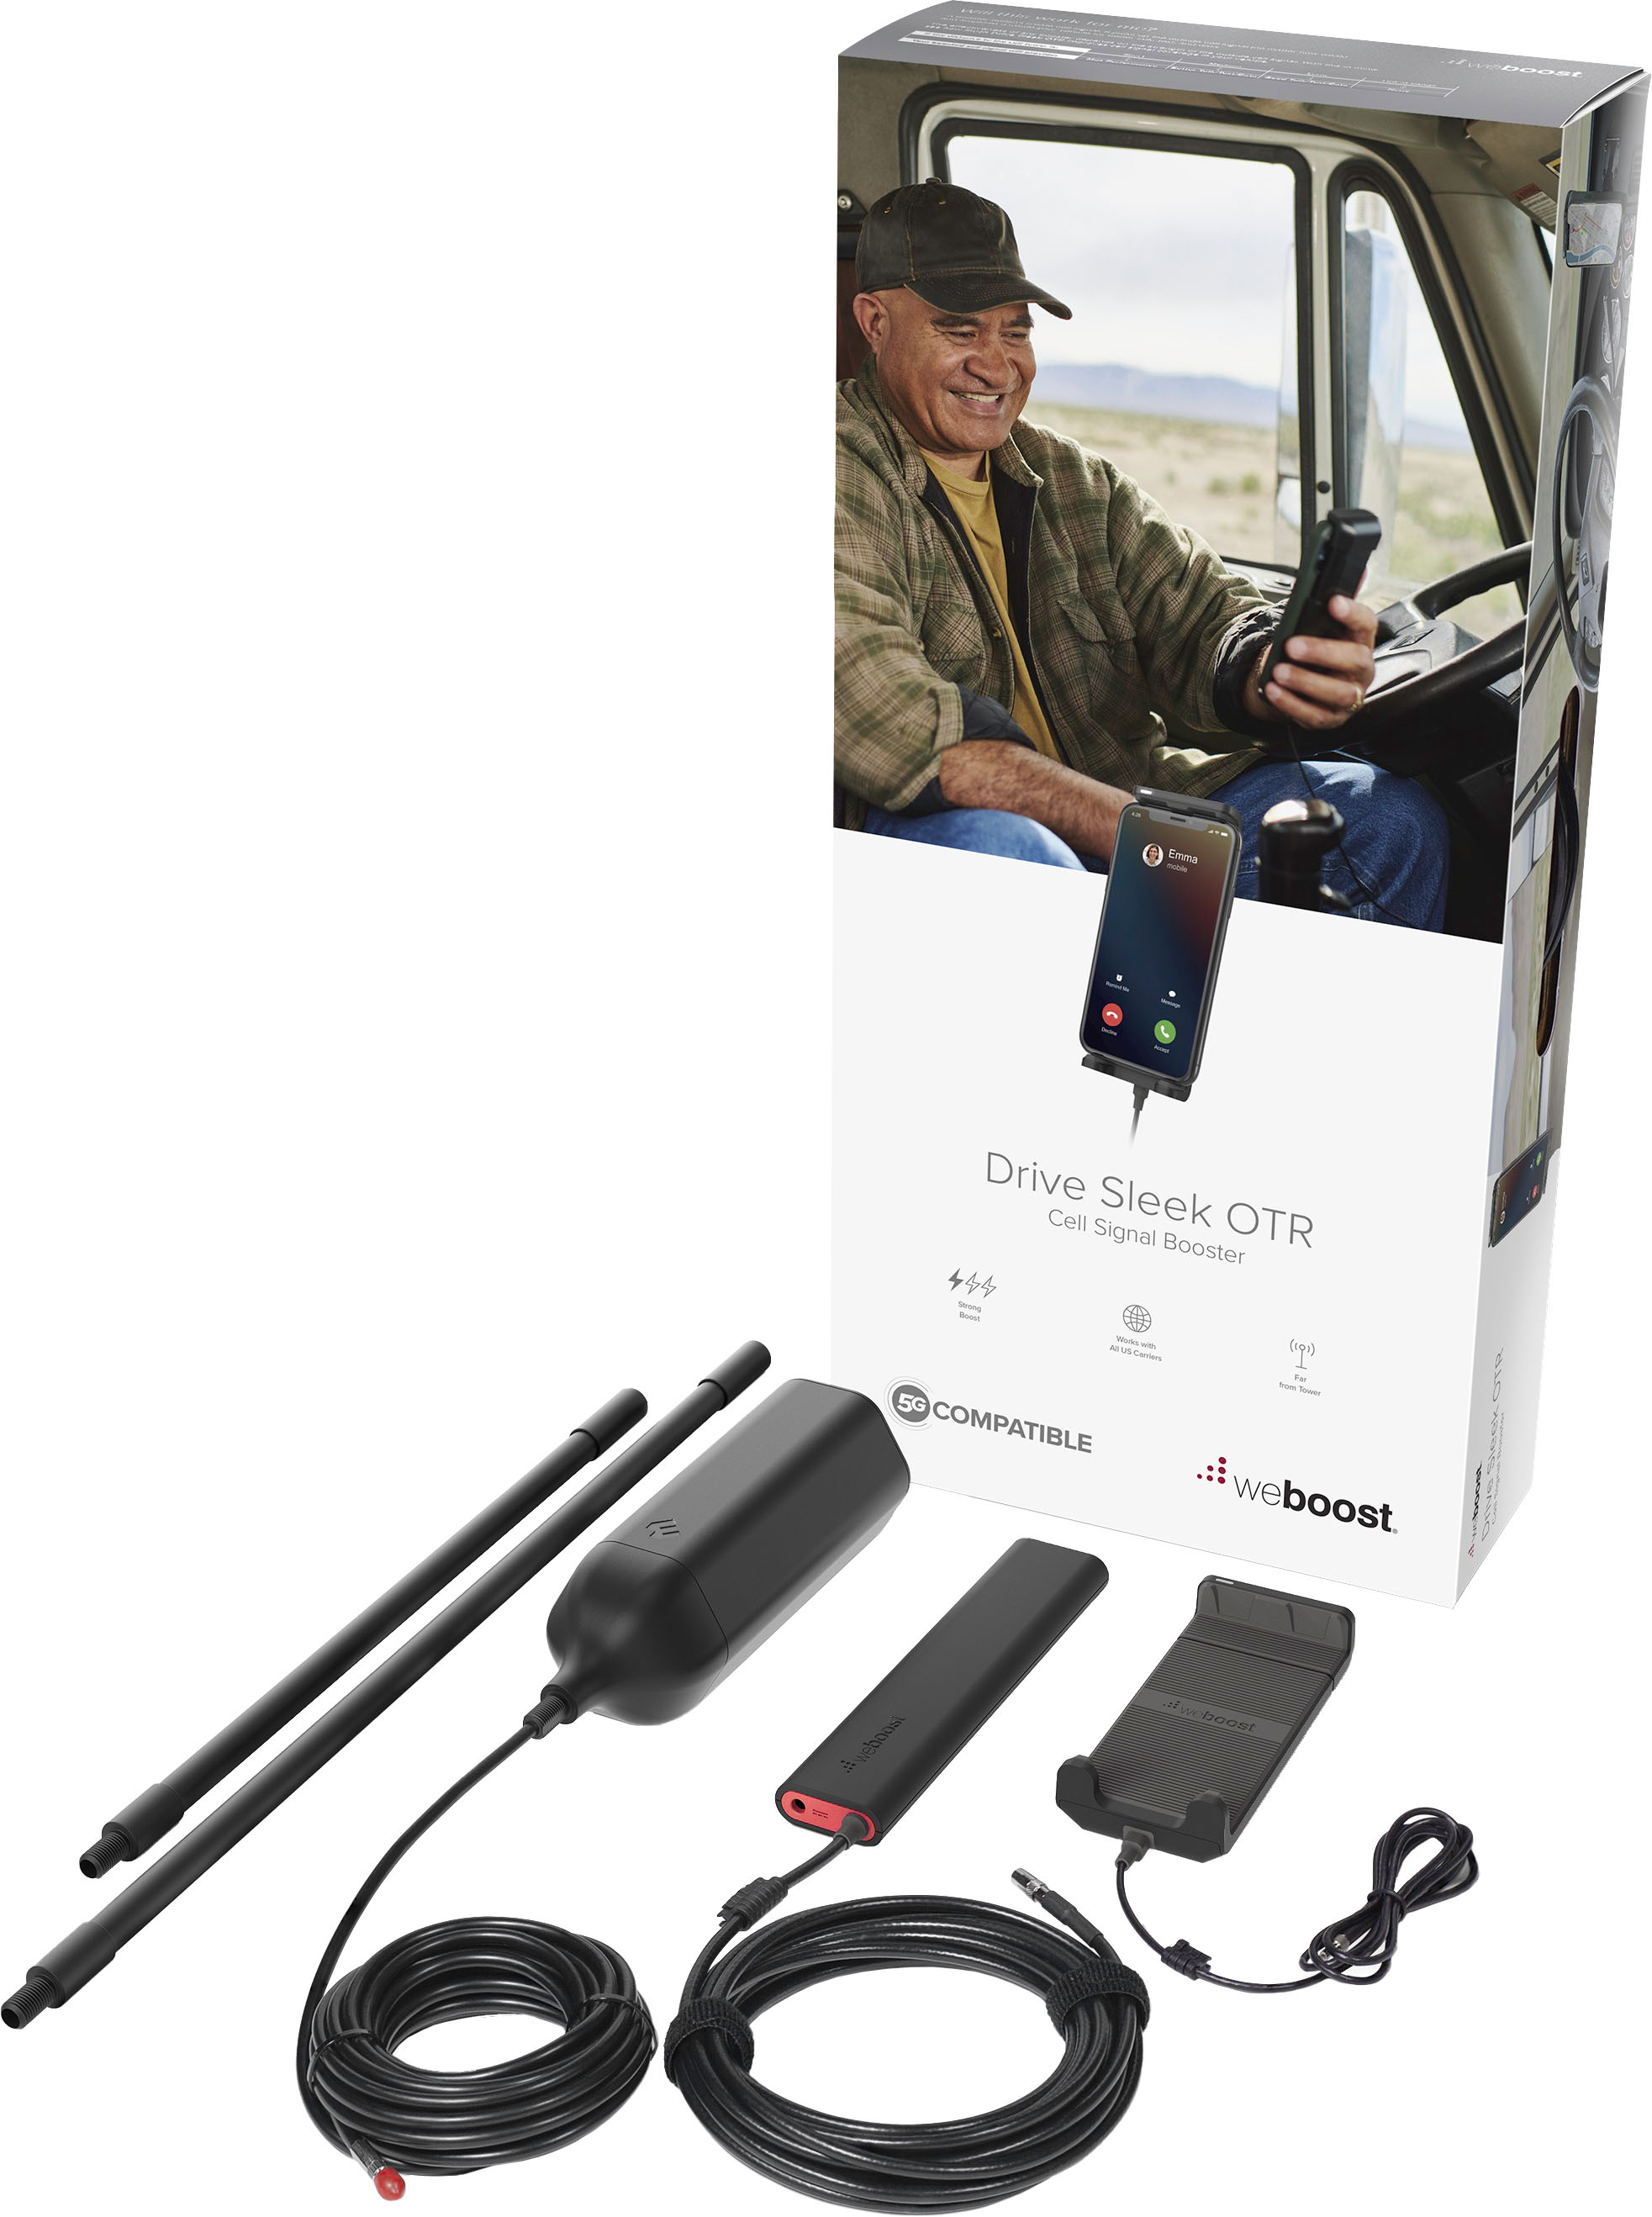 Angle View: weBoost - Drive Sleek OTR Vehicle Cell Phone Signal Booster Kit for Single User in Semi Trucks and Overland Vehicles